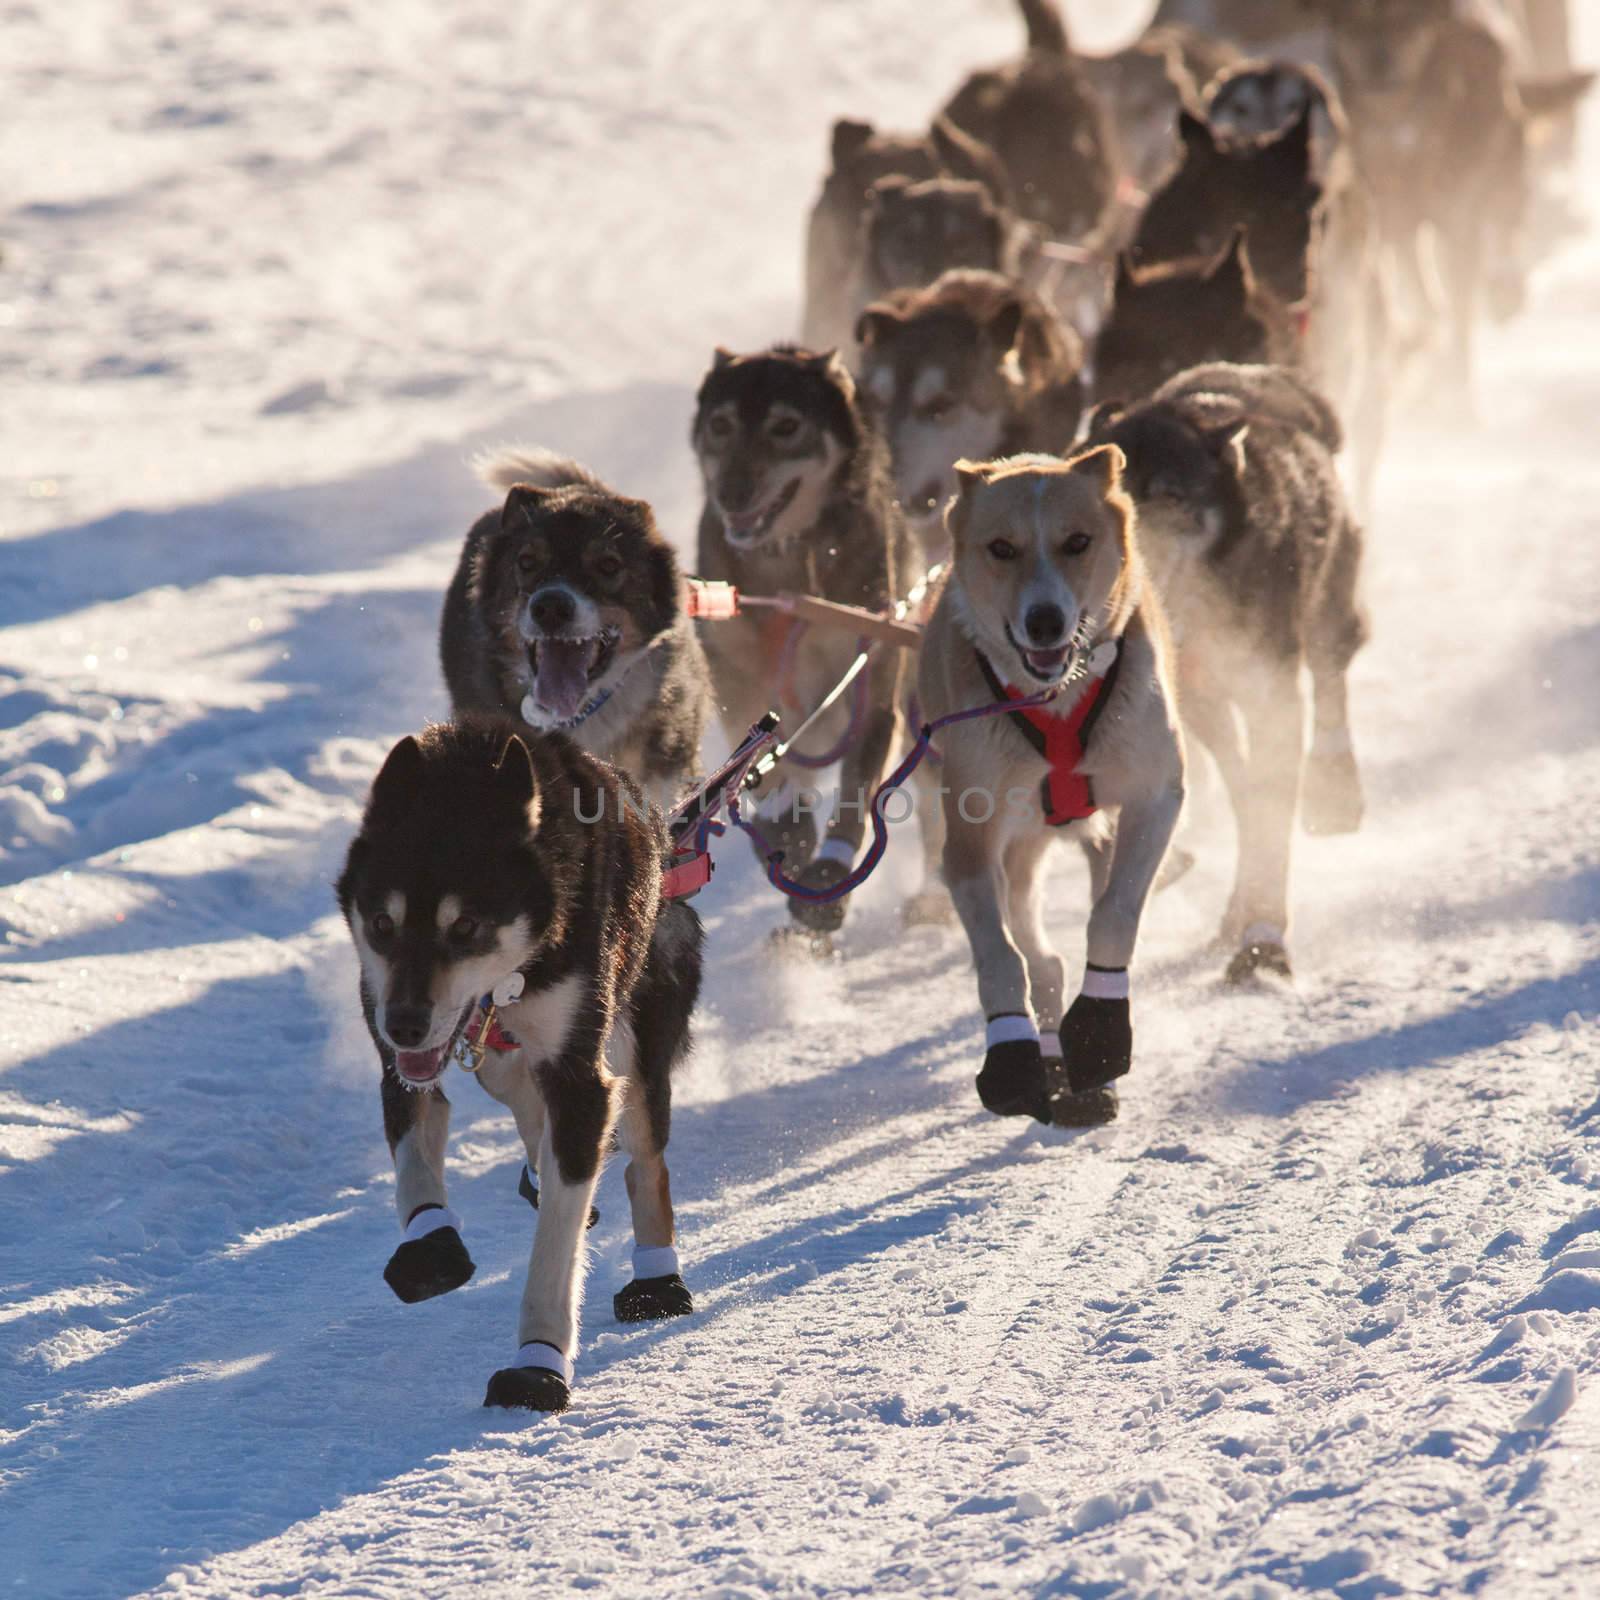 Team of sleigh dogs pulling by PiLens